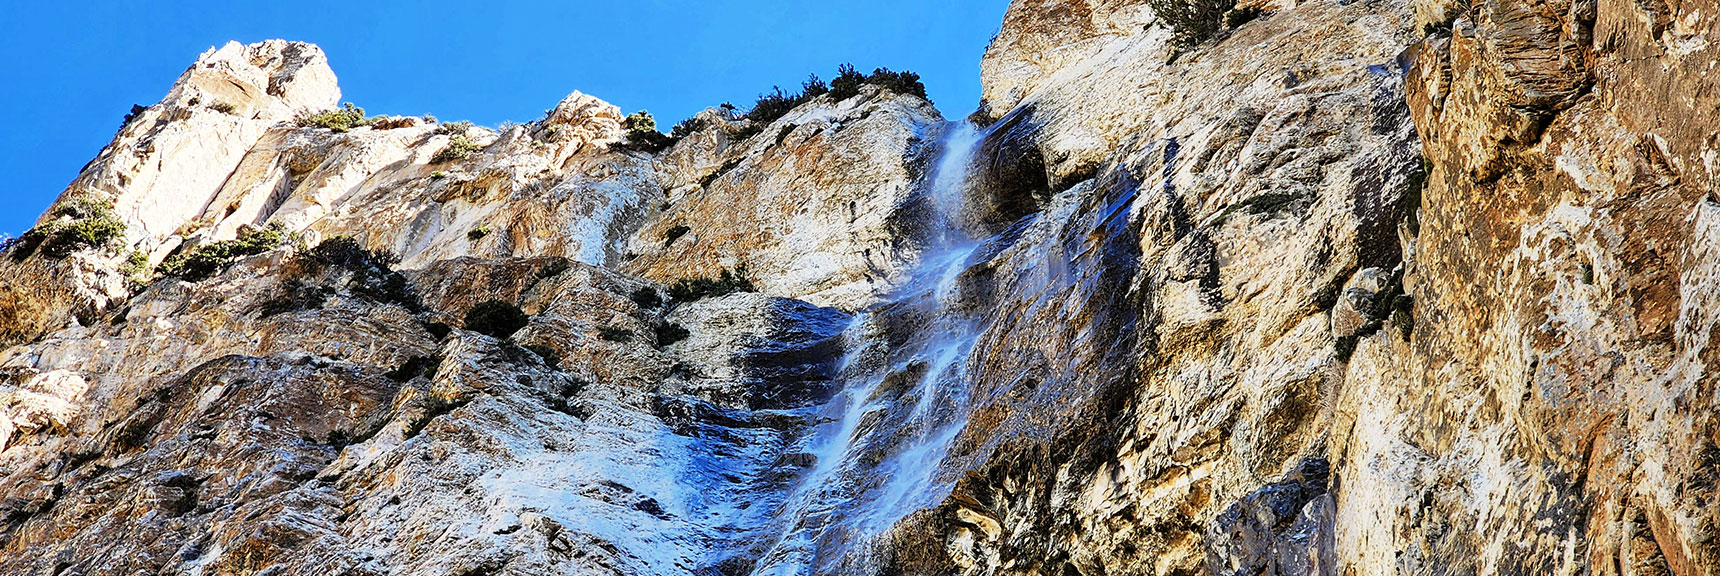 Largest Stream Cascading Over The Cliff Edge Below North Loop Trail | Mary Jane Falls | Mt. Charleston Wilderness | Spring Mountains, Nevada